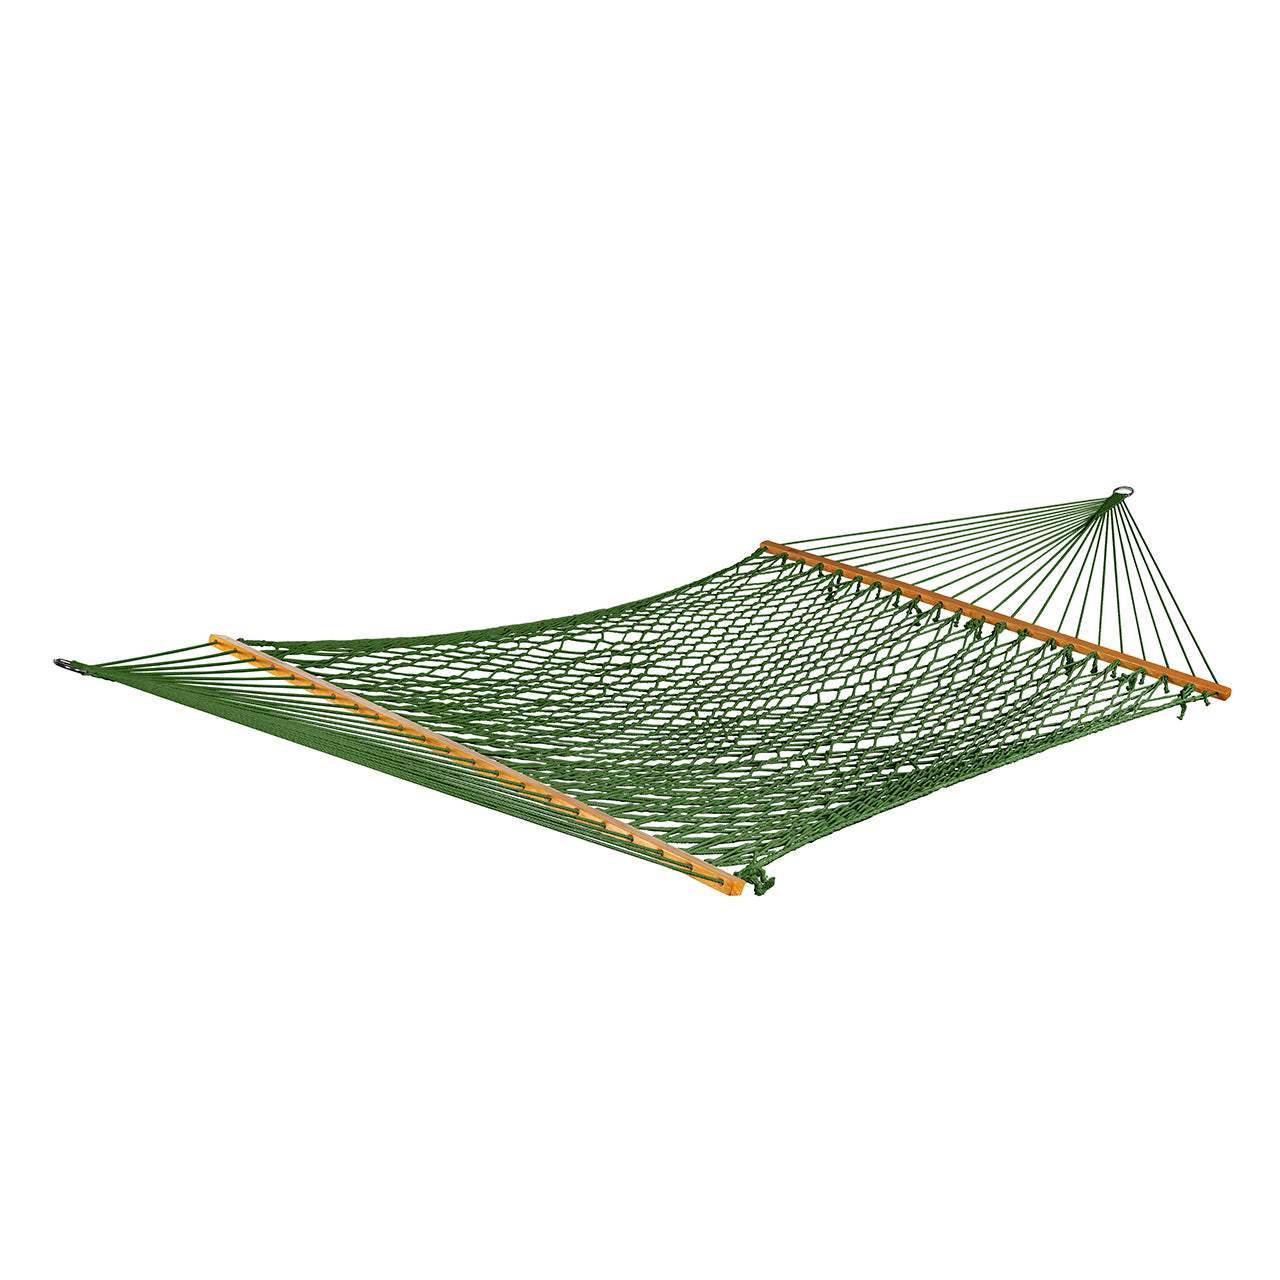 Bliss Hammocks 60-inch Wide Cotton Rope Hammock with Spreader Bar, S Hooks, and Chains in the green variation.